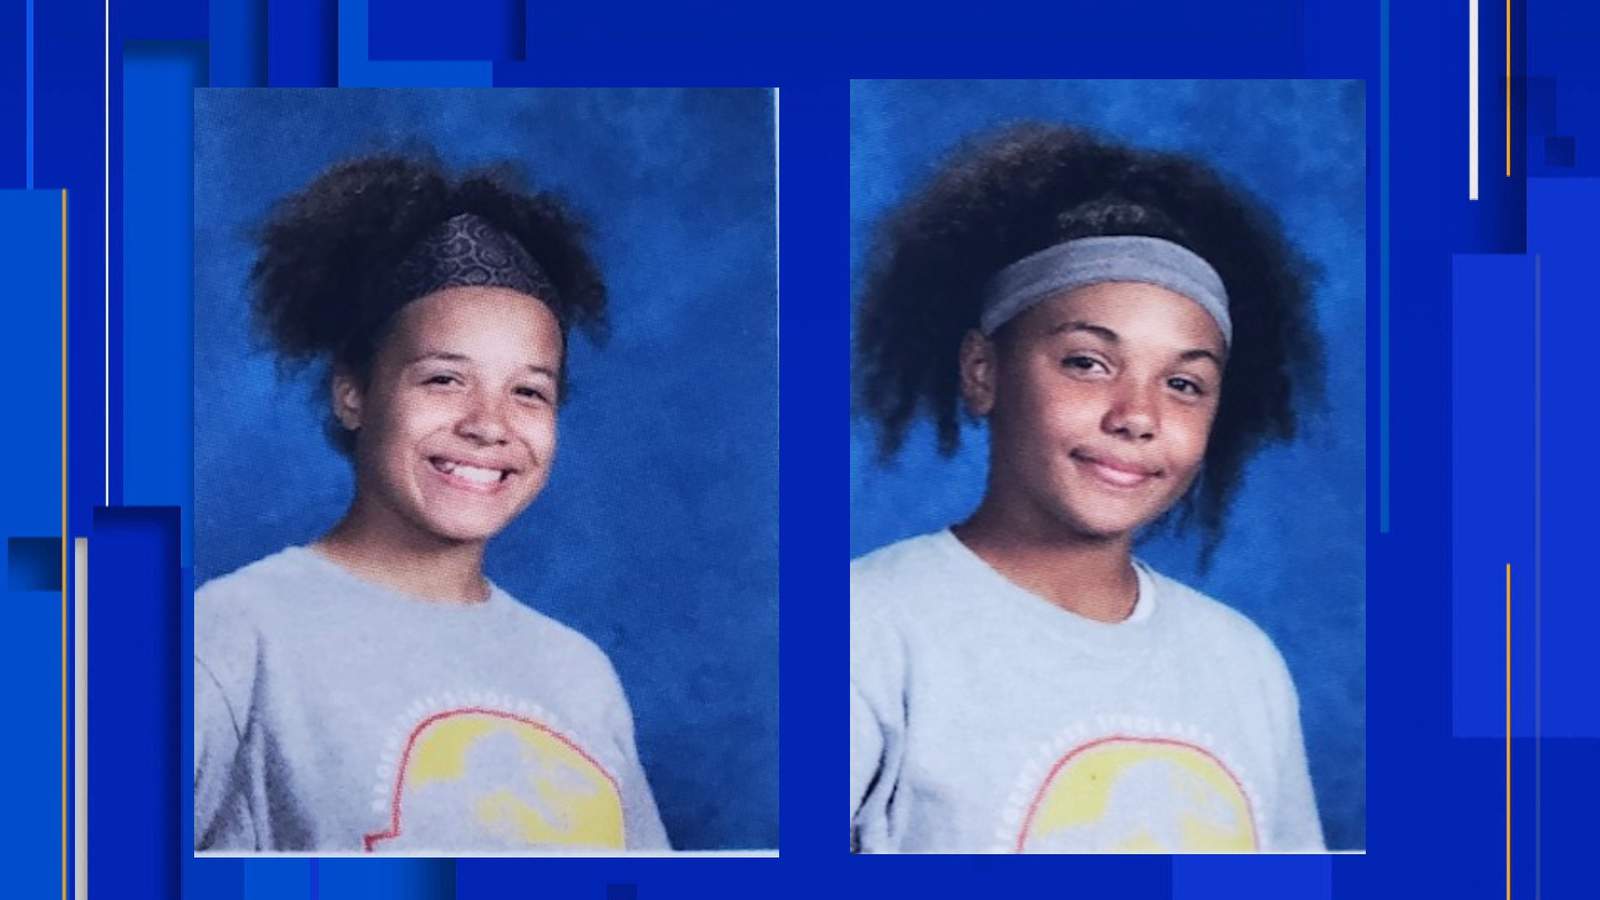 Detroit police want help finding 2 missing 13-year-old girls